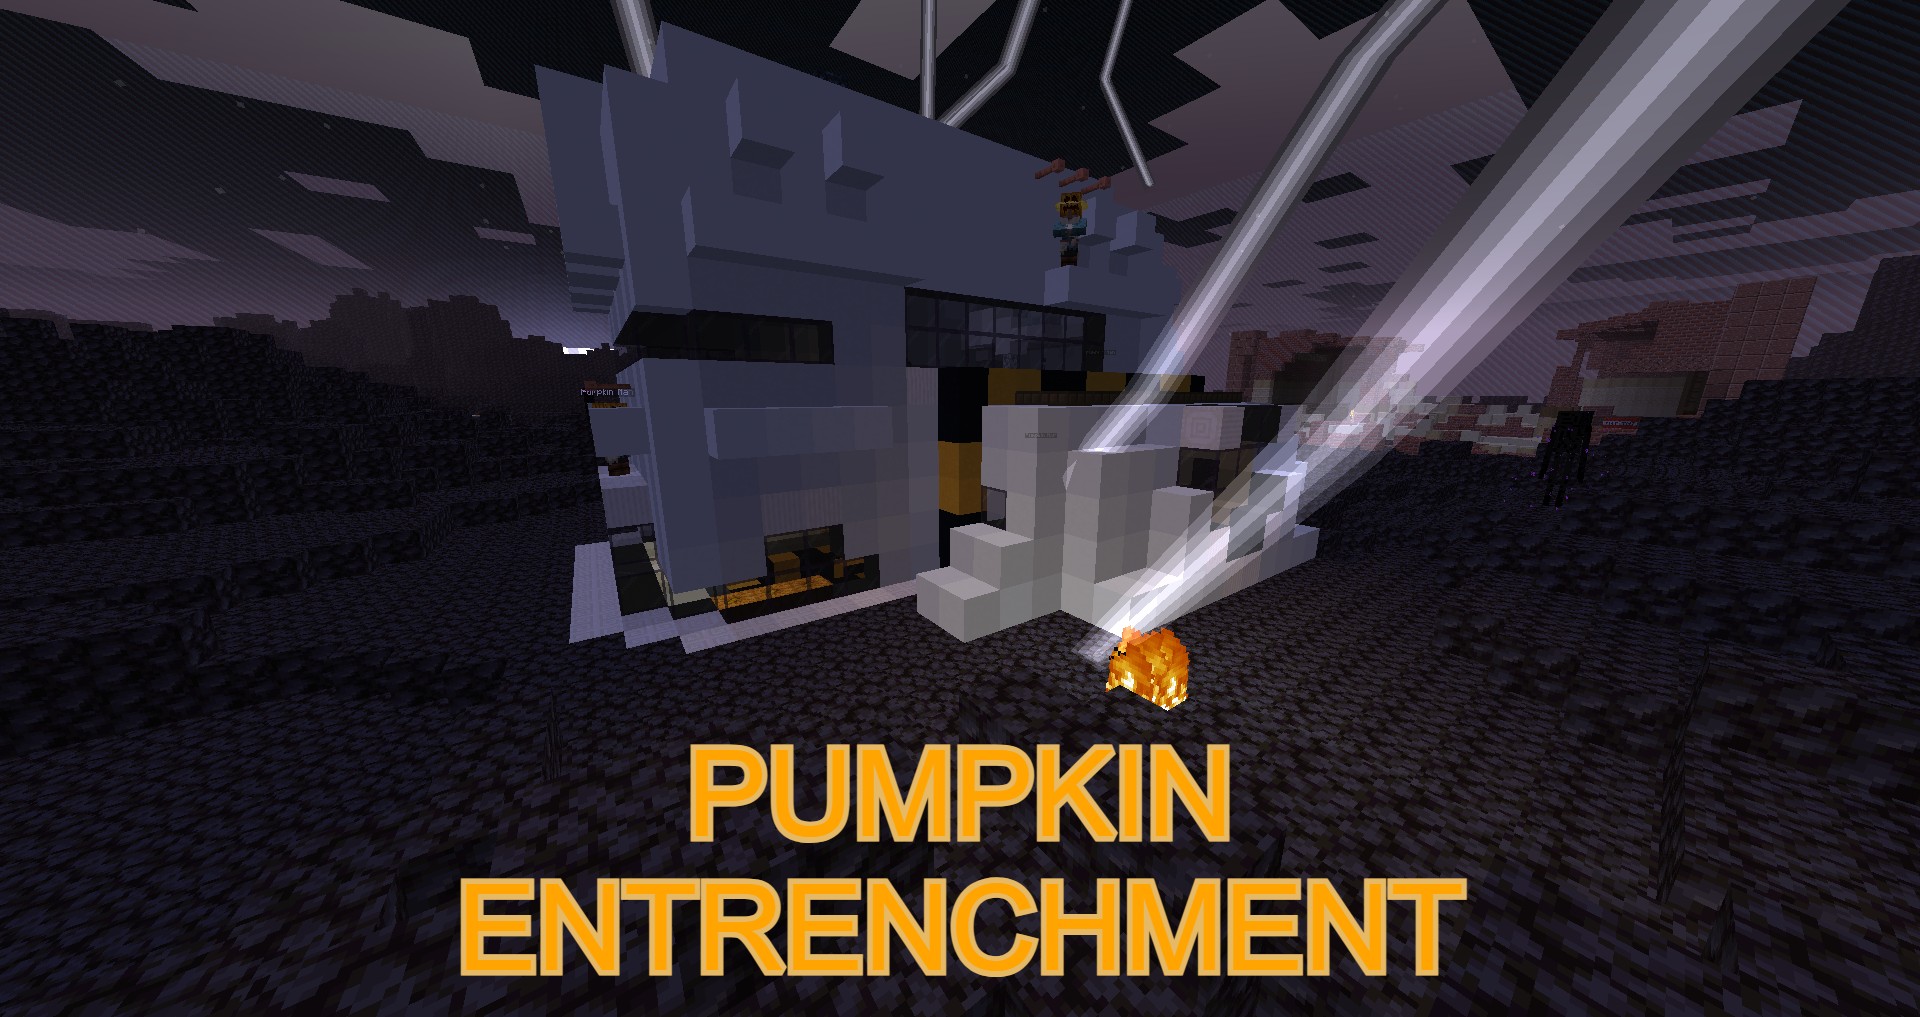 Download PUMPKIN ENTRENCHMENT for Minecraft 1.17.1